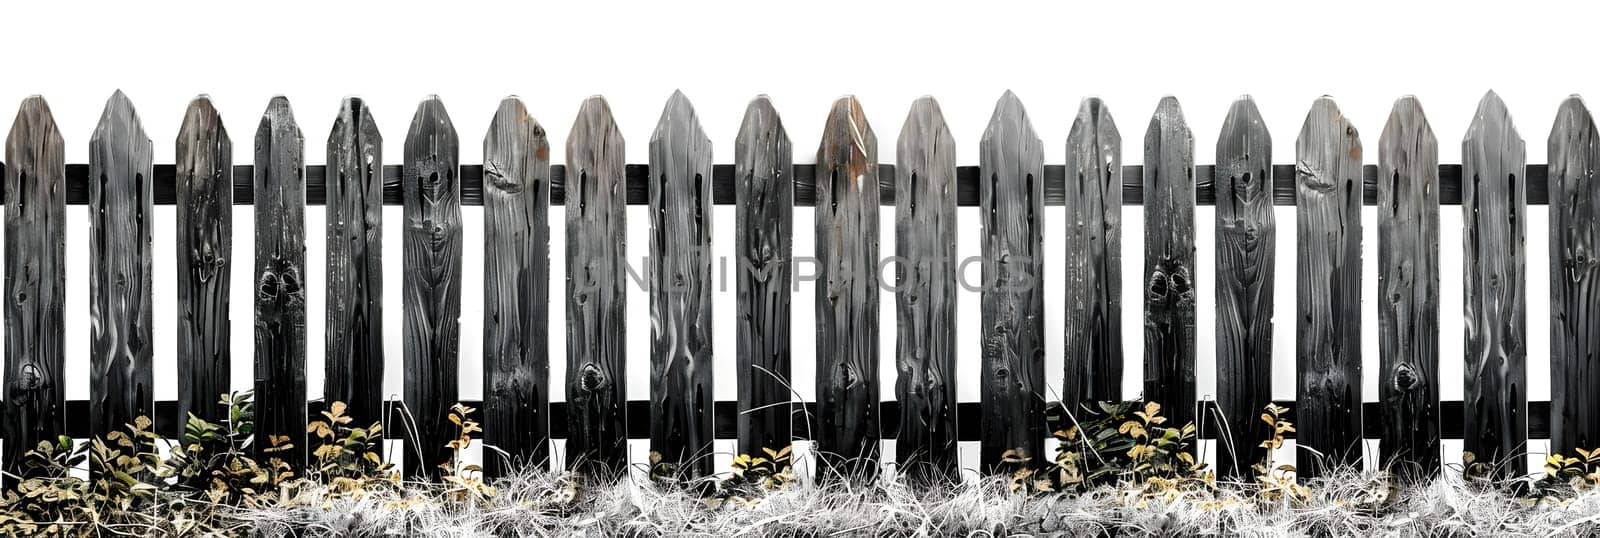 A monochromatic image showcasing a wooden picket fence, highlighting the symmetry and classic allure of the timeless tool